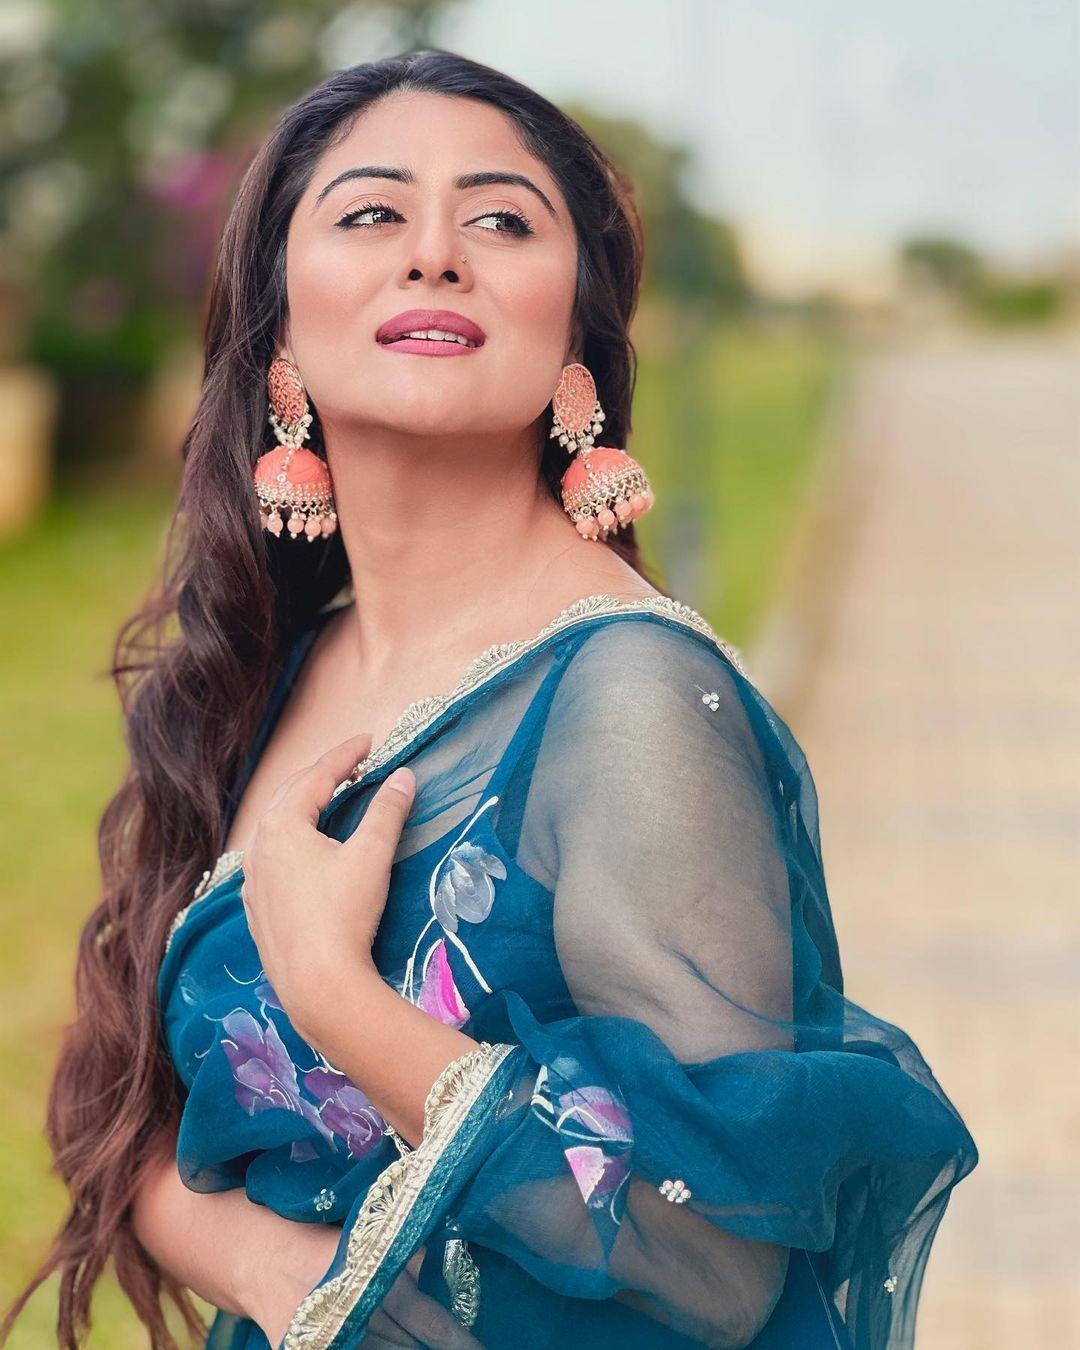 Falaq Naaz is the sister of actors Shafaq Naaz and Sheezan Khan. She is best known for her roles in TV shows, most notably the long running soap opera Sasural Simar Ka in which she played the character of Jhanvi Bhardwaj.